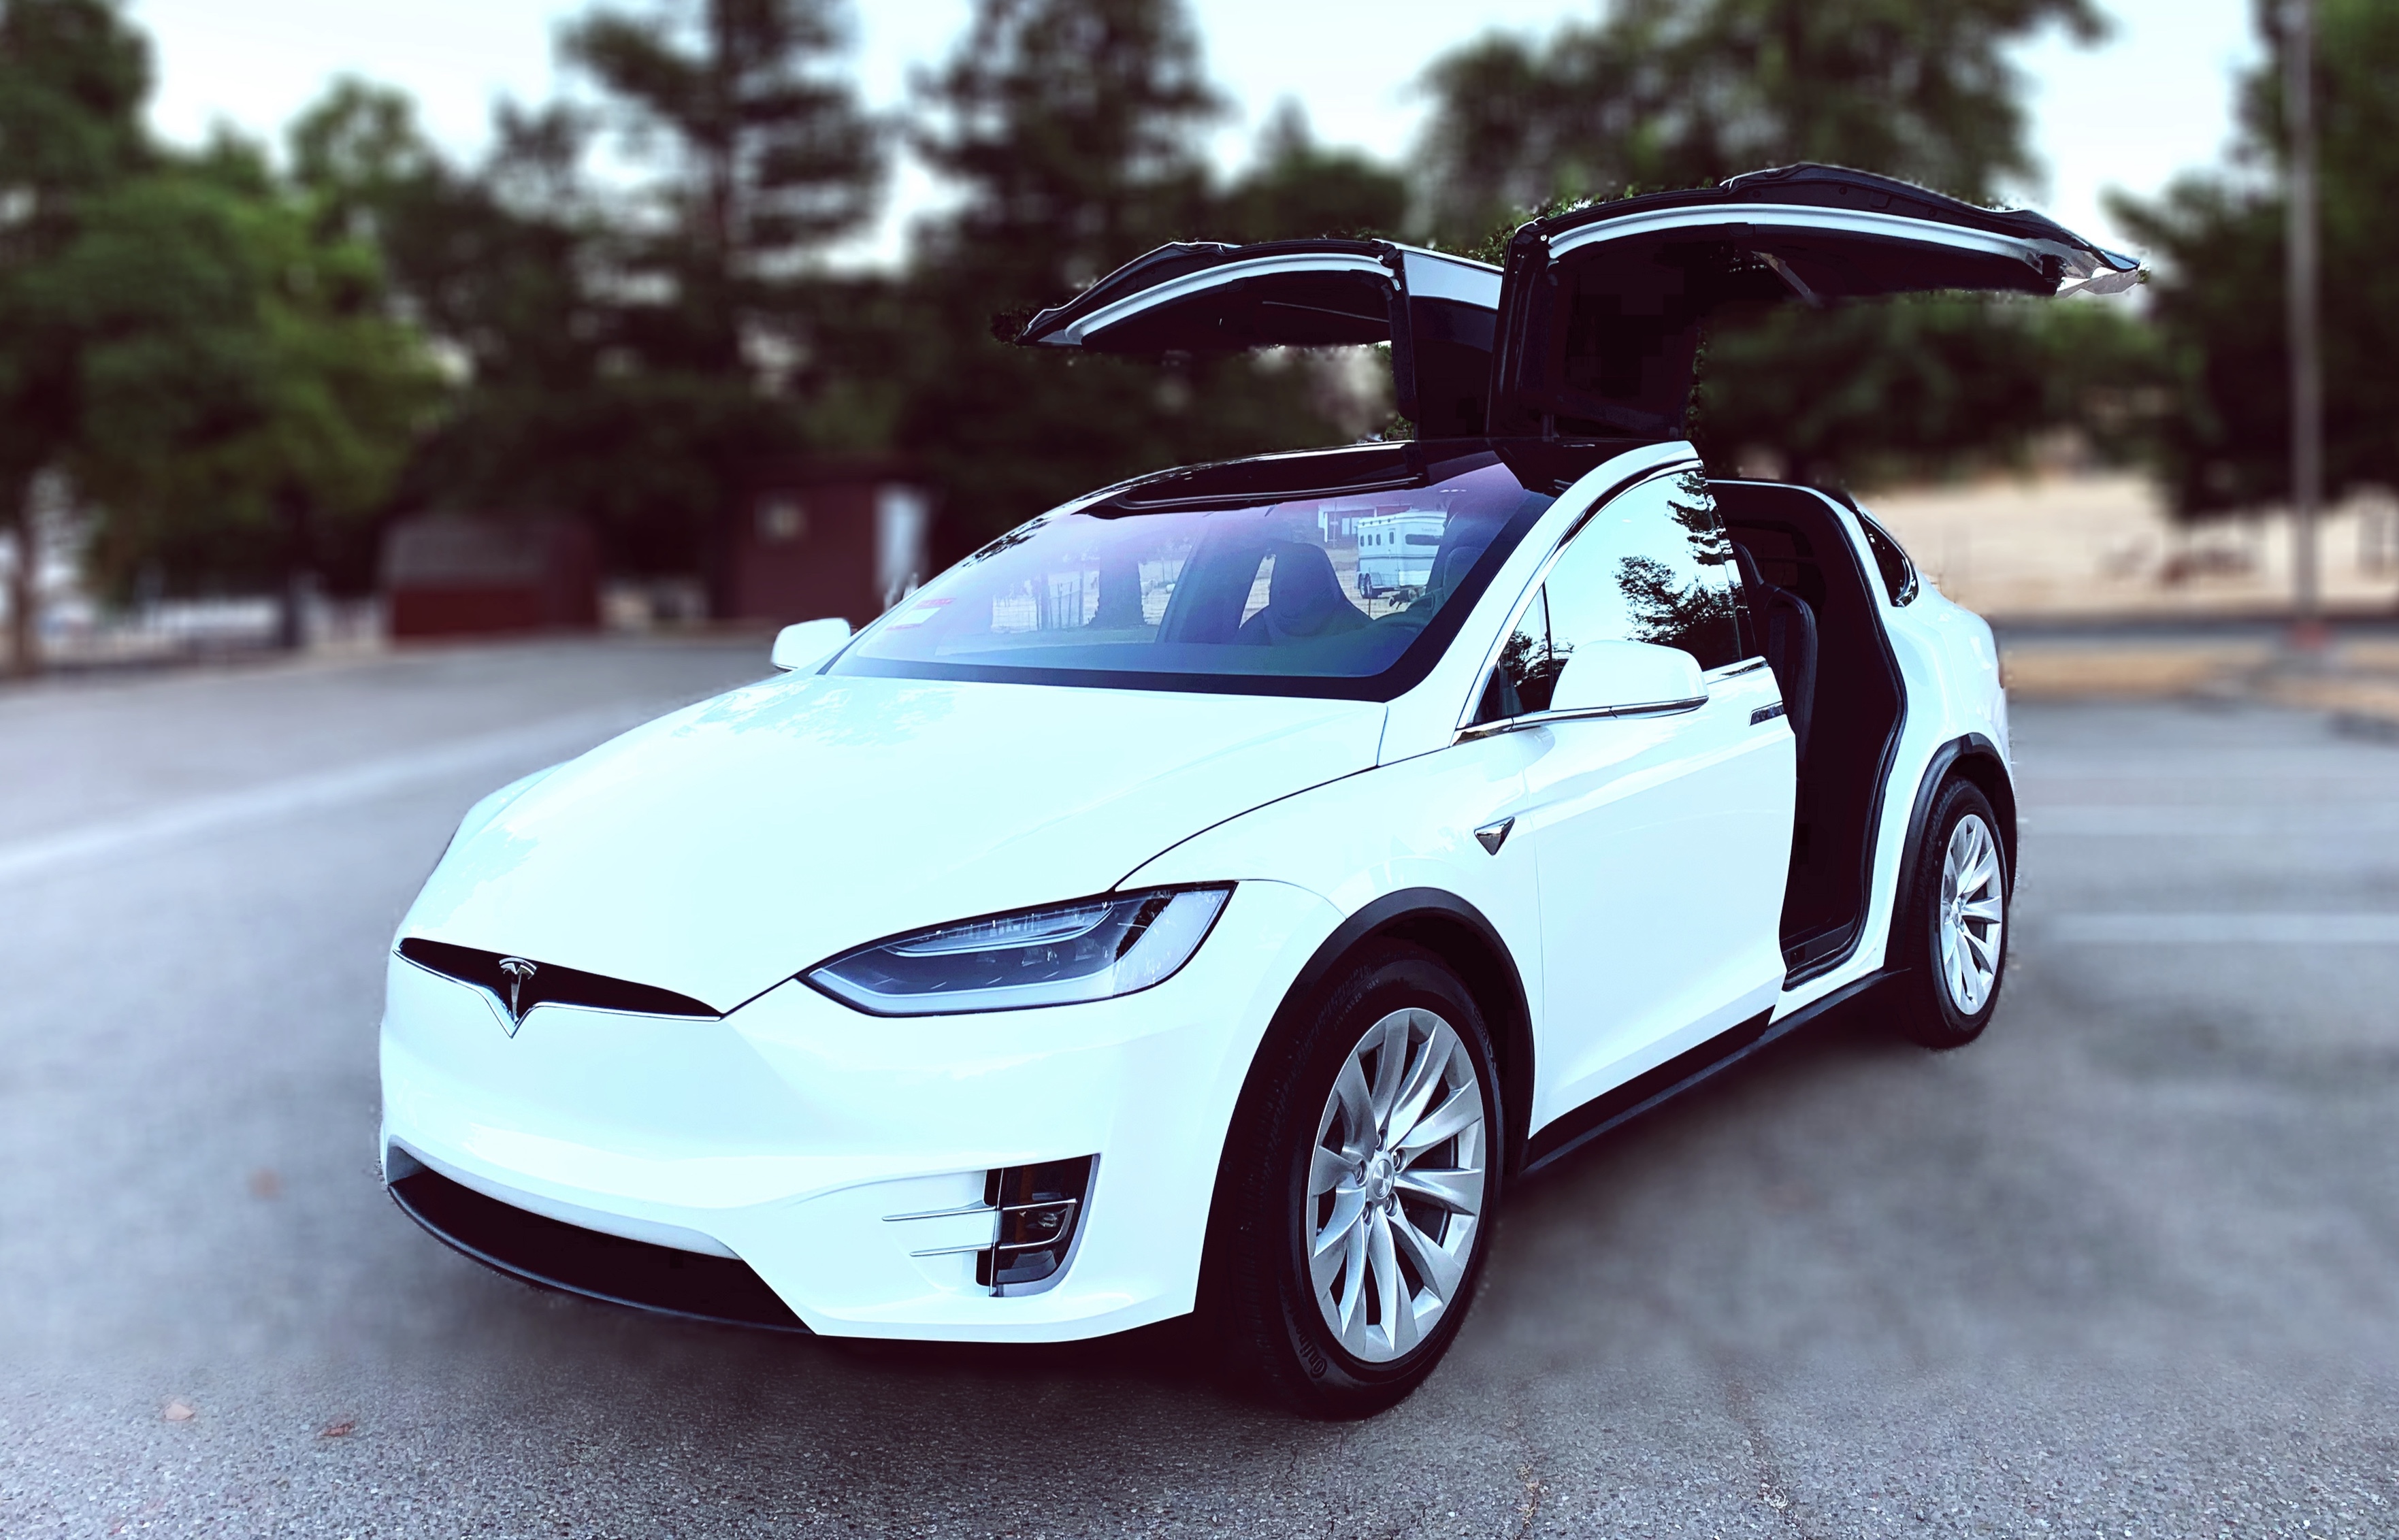 WHERE TO RENT A TESLA MODEL X